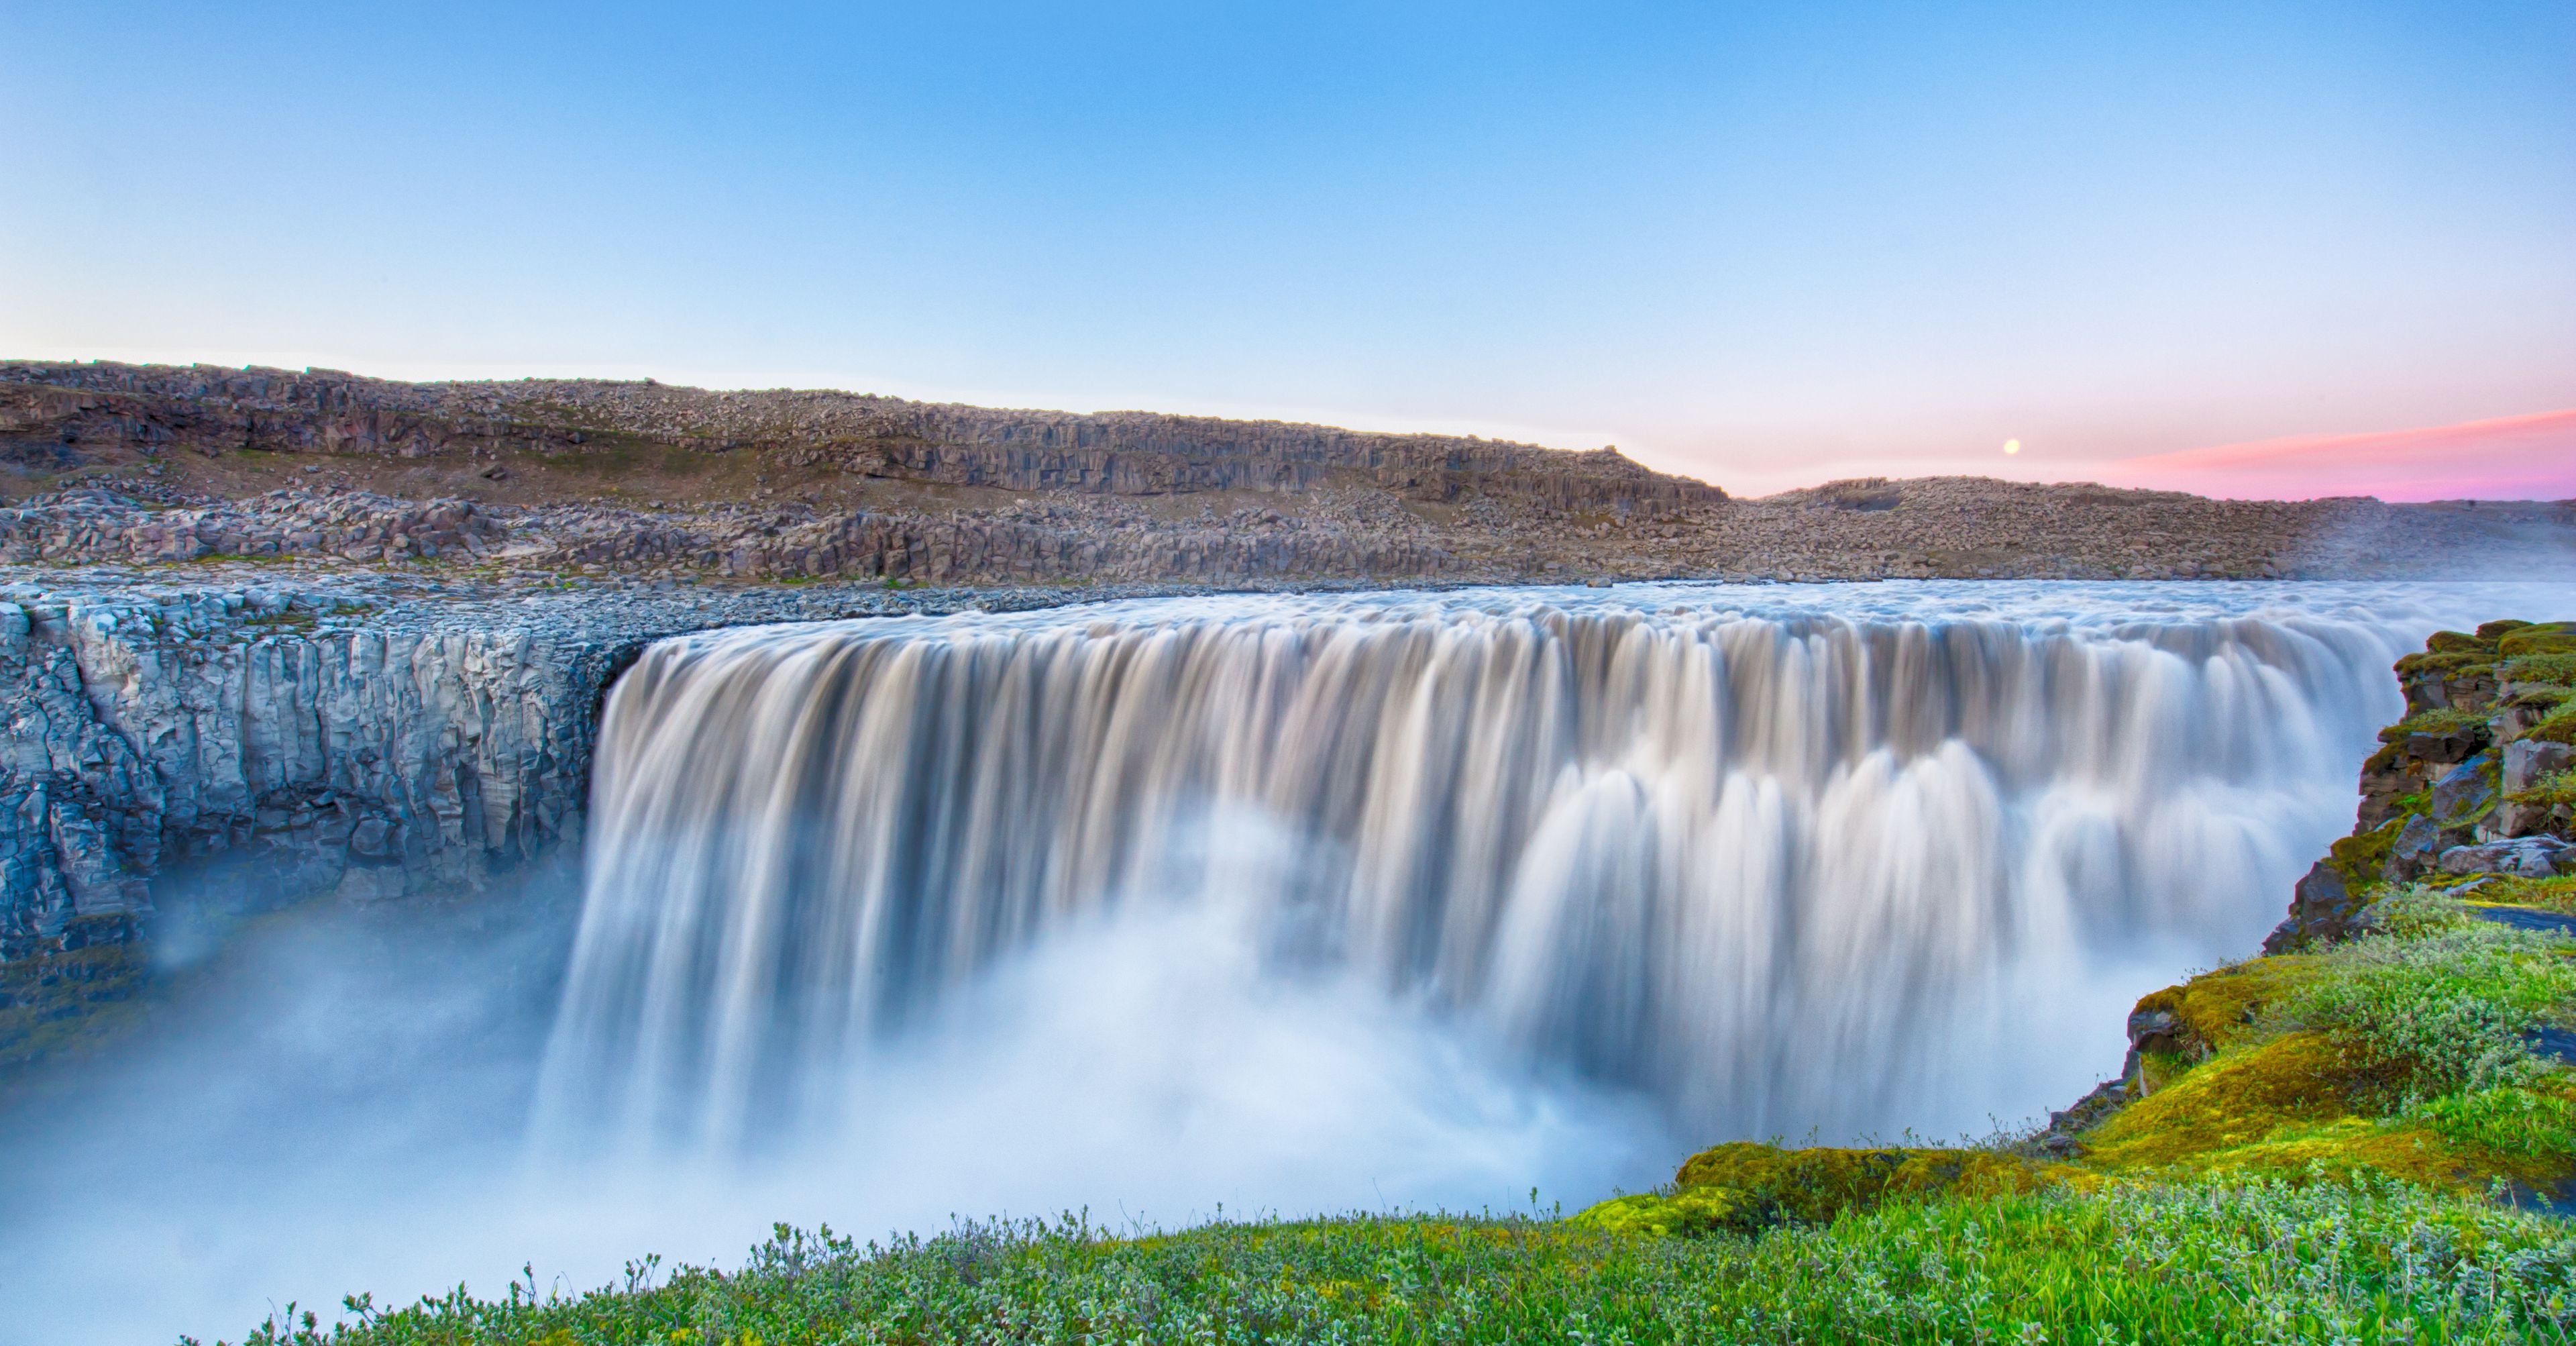 The mighty Dettifoss waterfall, Europe's most powerful waterfall, mesmerizing visitors with its sheer power and beauty